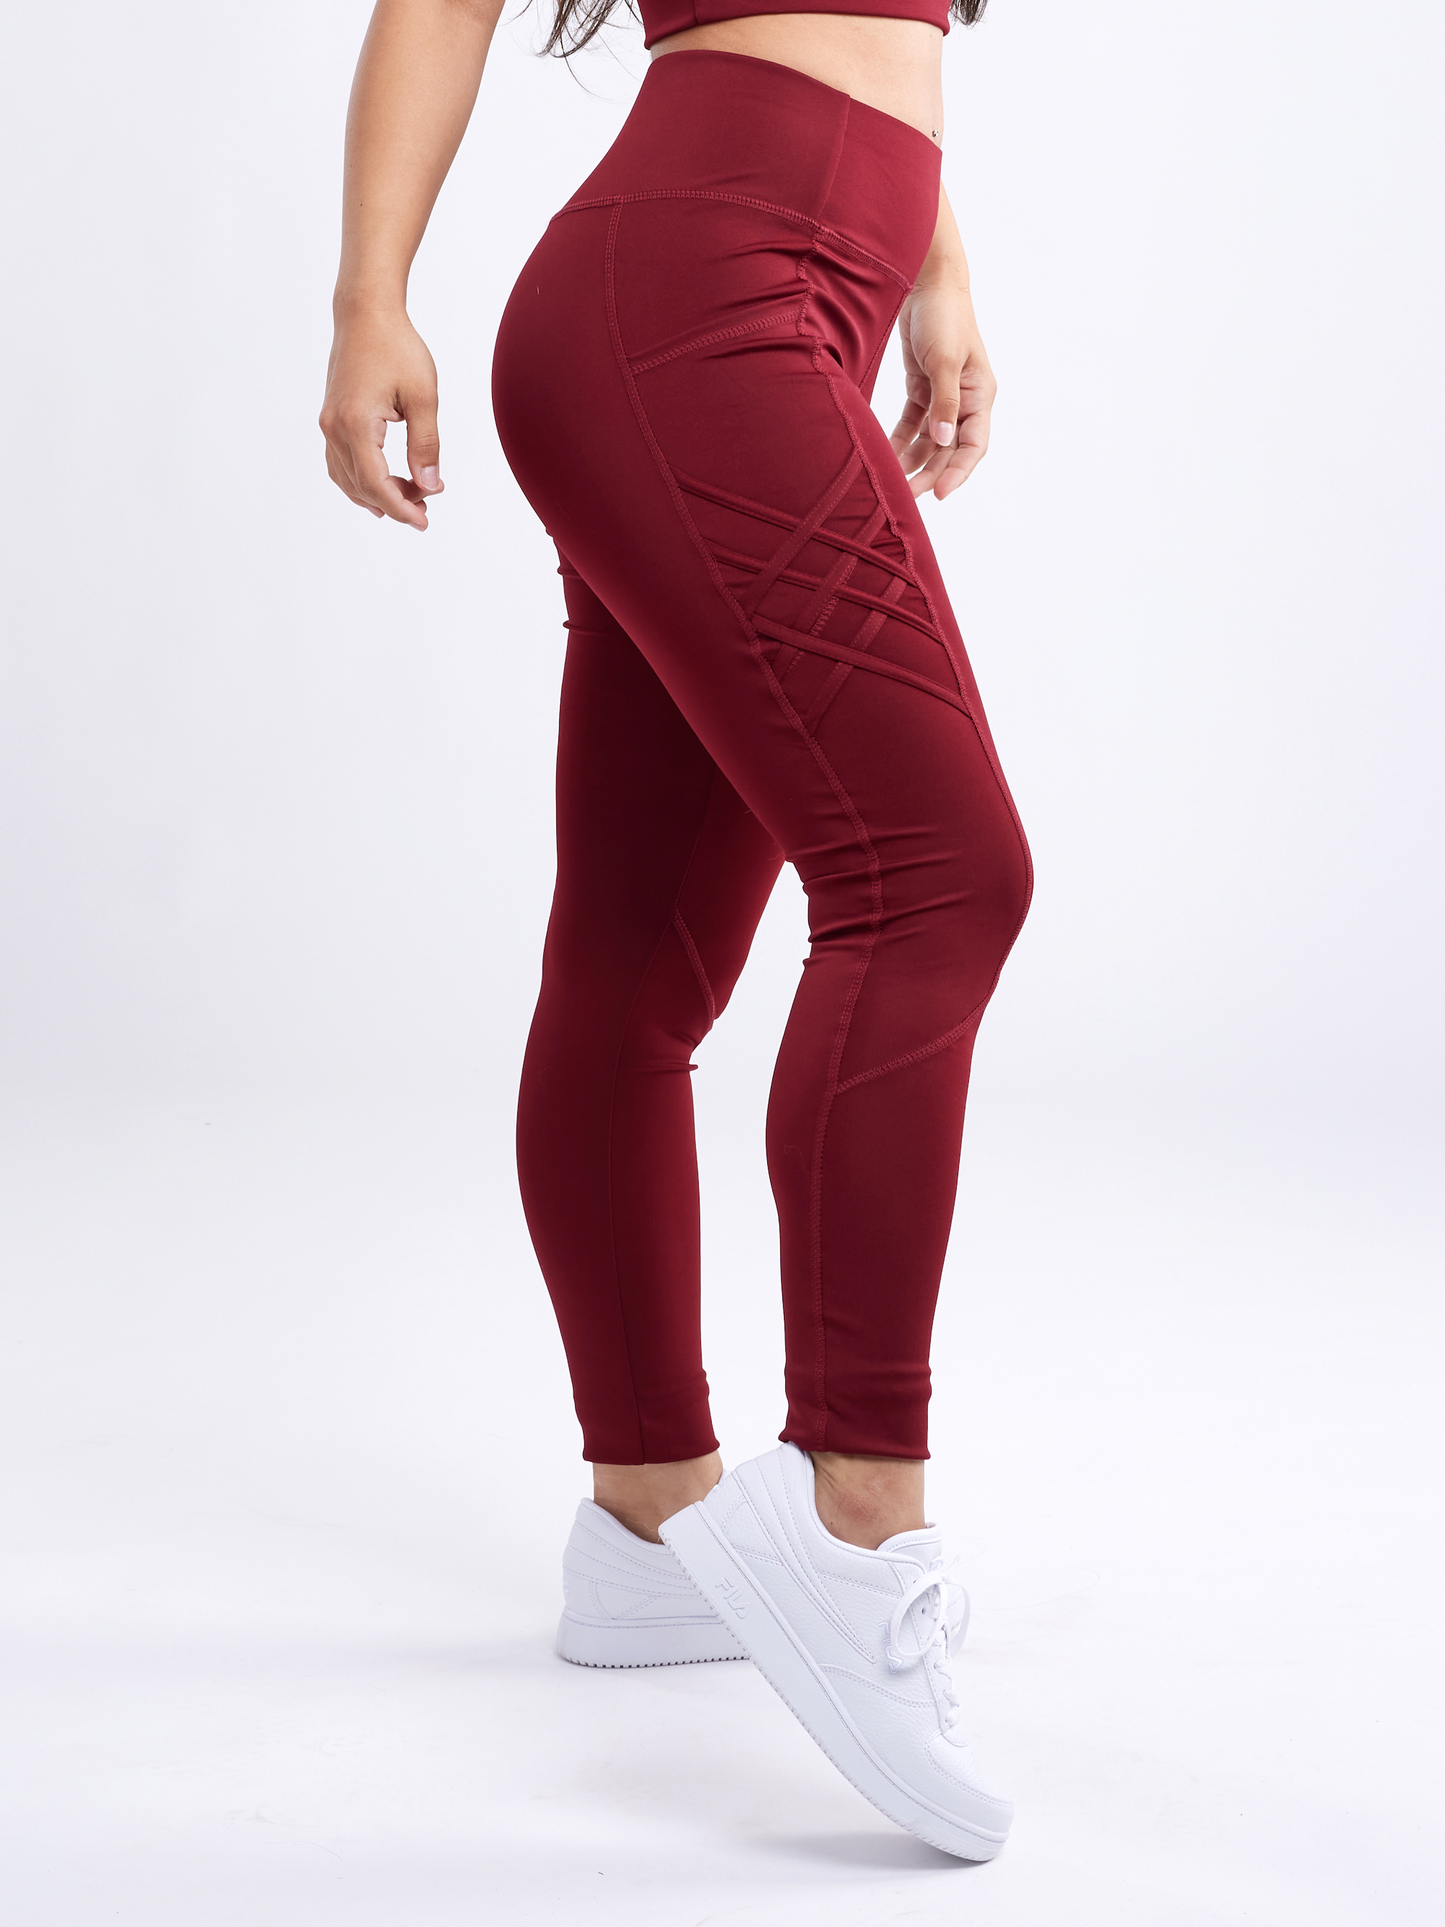 High-Waisted Criss-Cross Training Leggings with Hip Pockets